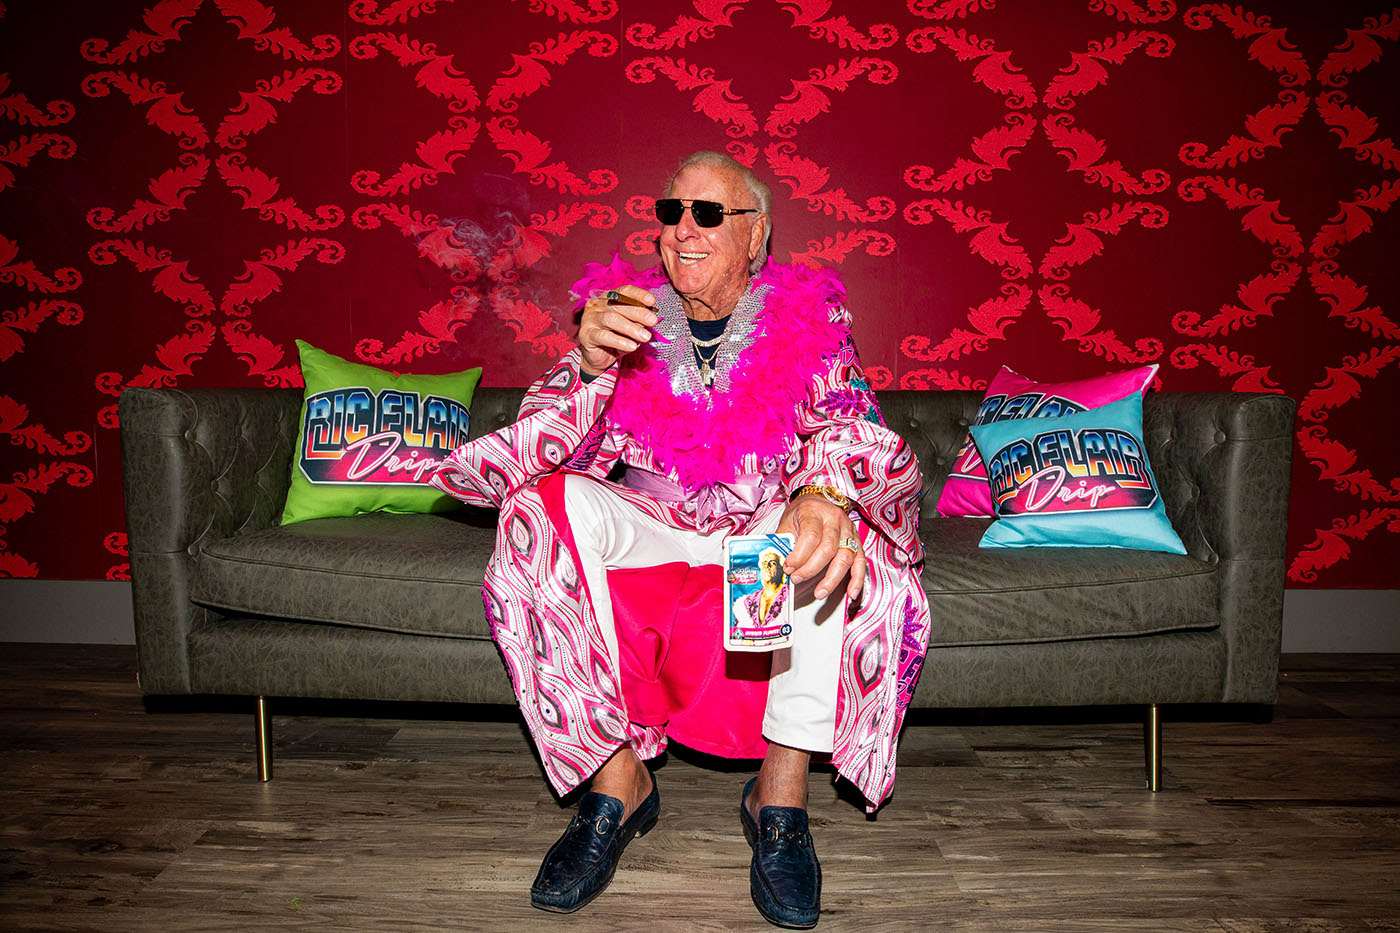 RIC-FLAIR- ドリップ AGOD10BY-1 web mgmagazine